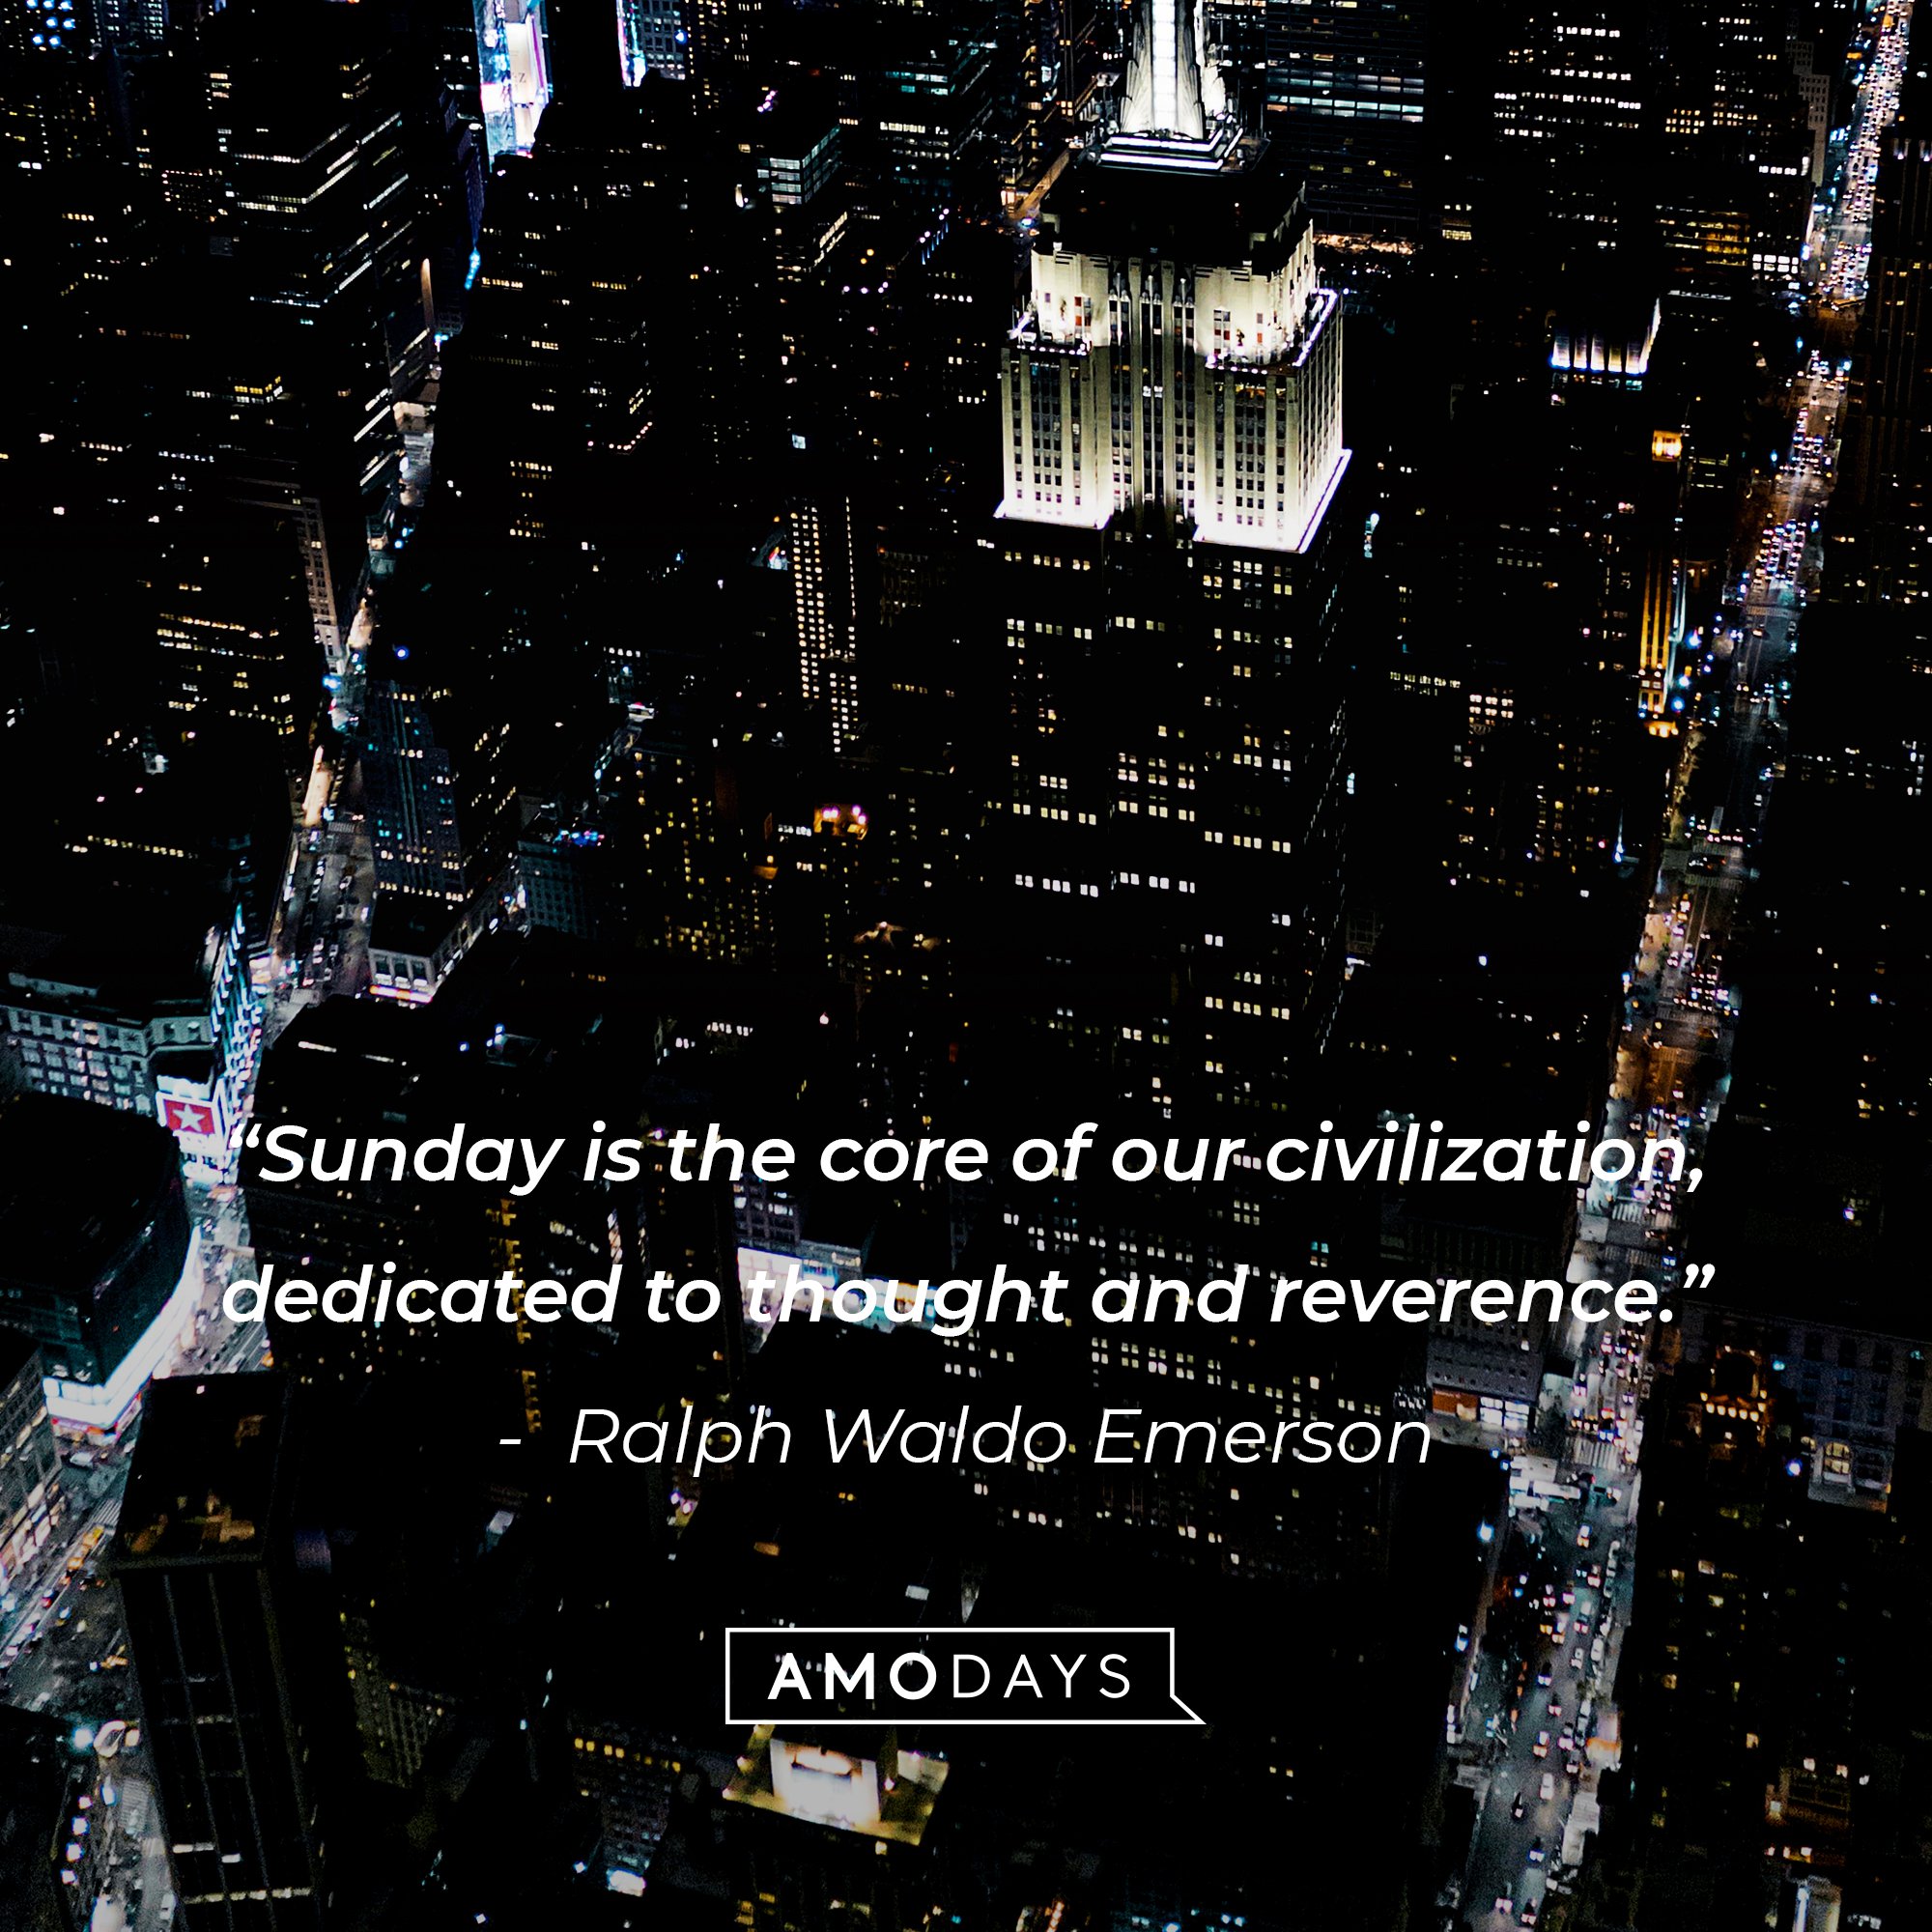 Ralph Waldo Emerson's quote: “Sunday is the core of our civilization, dedicated to thought and reverence.” | Image: AmoDays